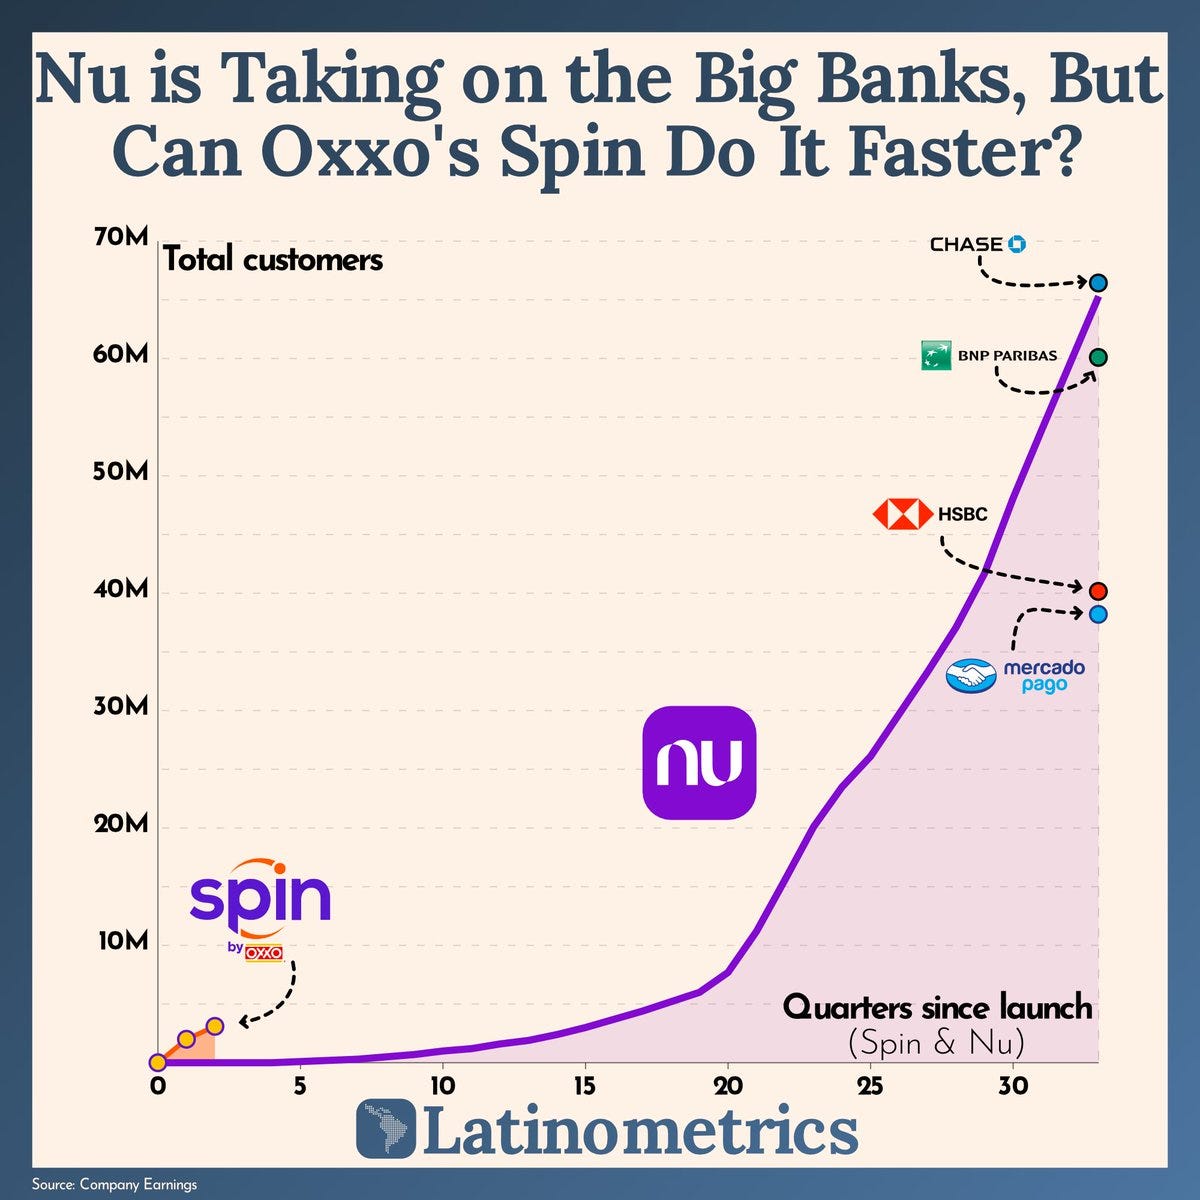 Latinometrics 📊 on X: "(1/9) Spin by Oxxo has reached 3M+ customers in 2  quarters, a number that took Nubank three years to reach  https://t.co/ejEd1Egrap" / X